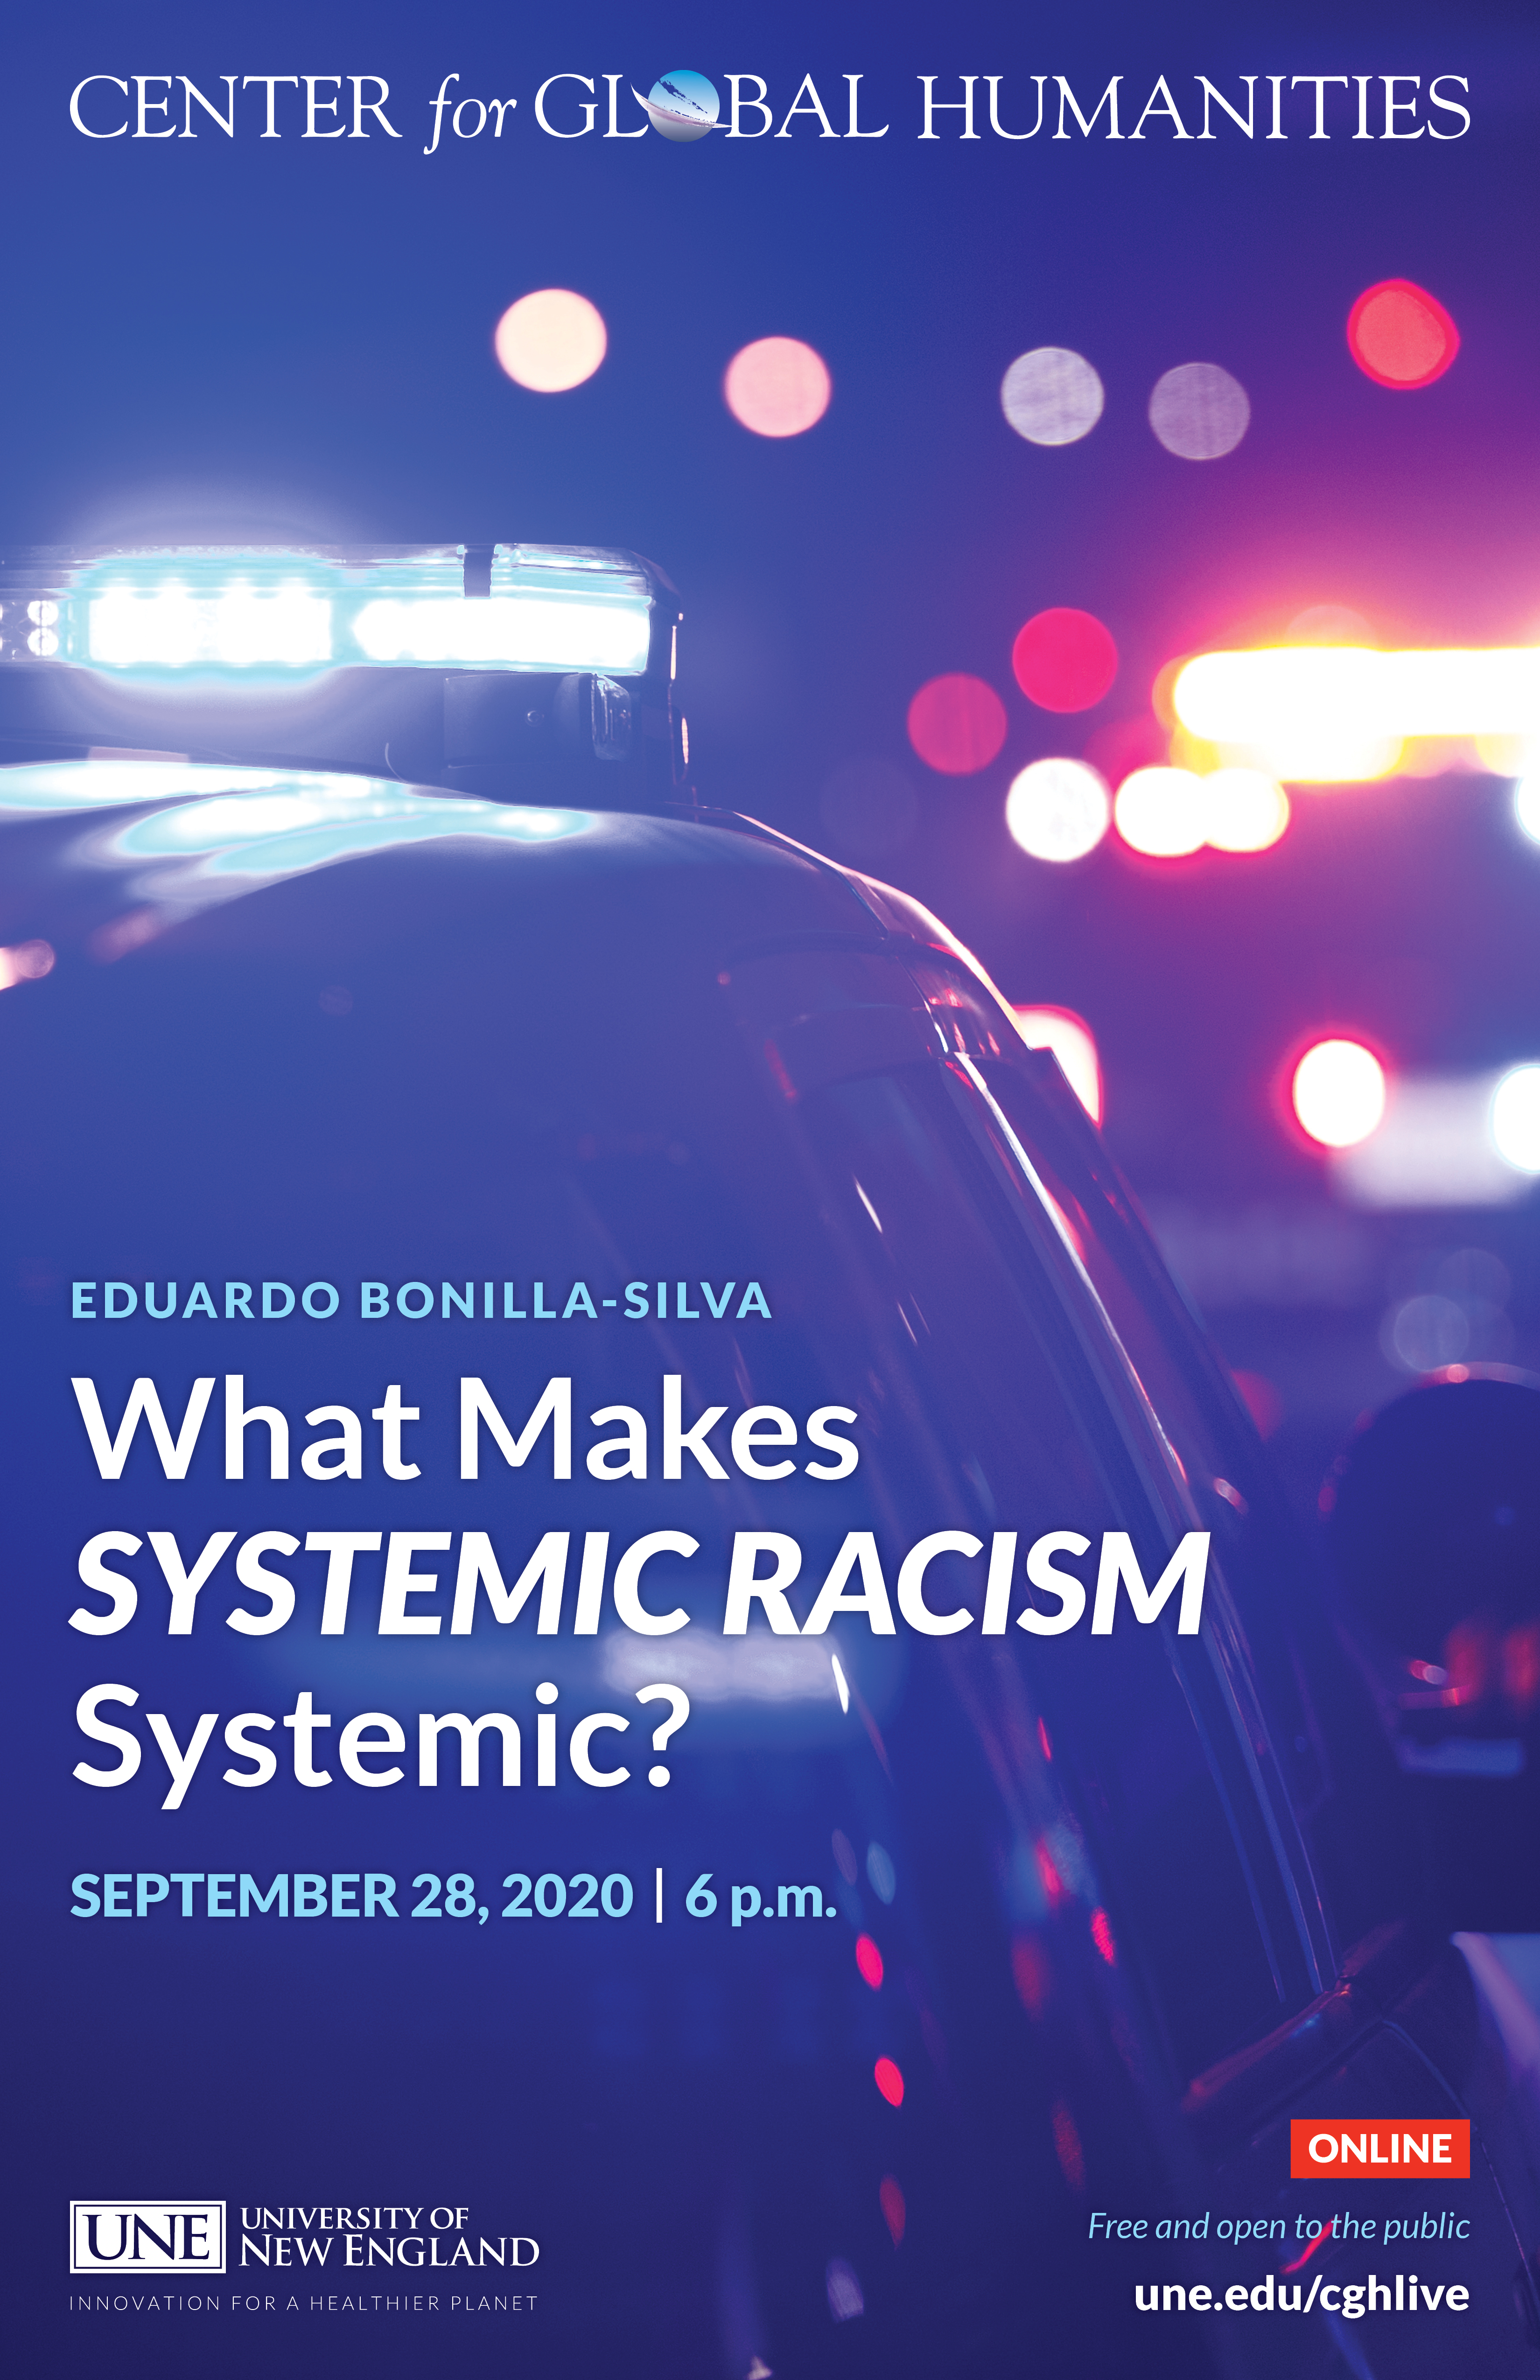 What Makes Systemic Racism Systemic?